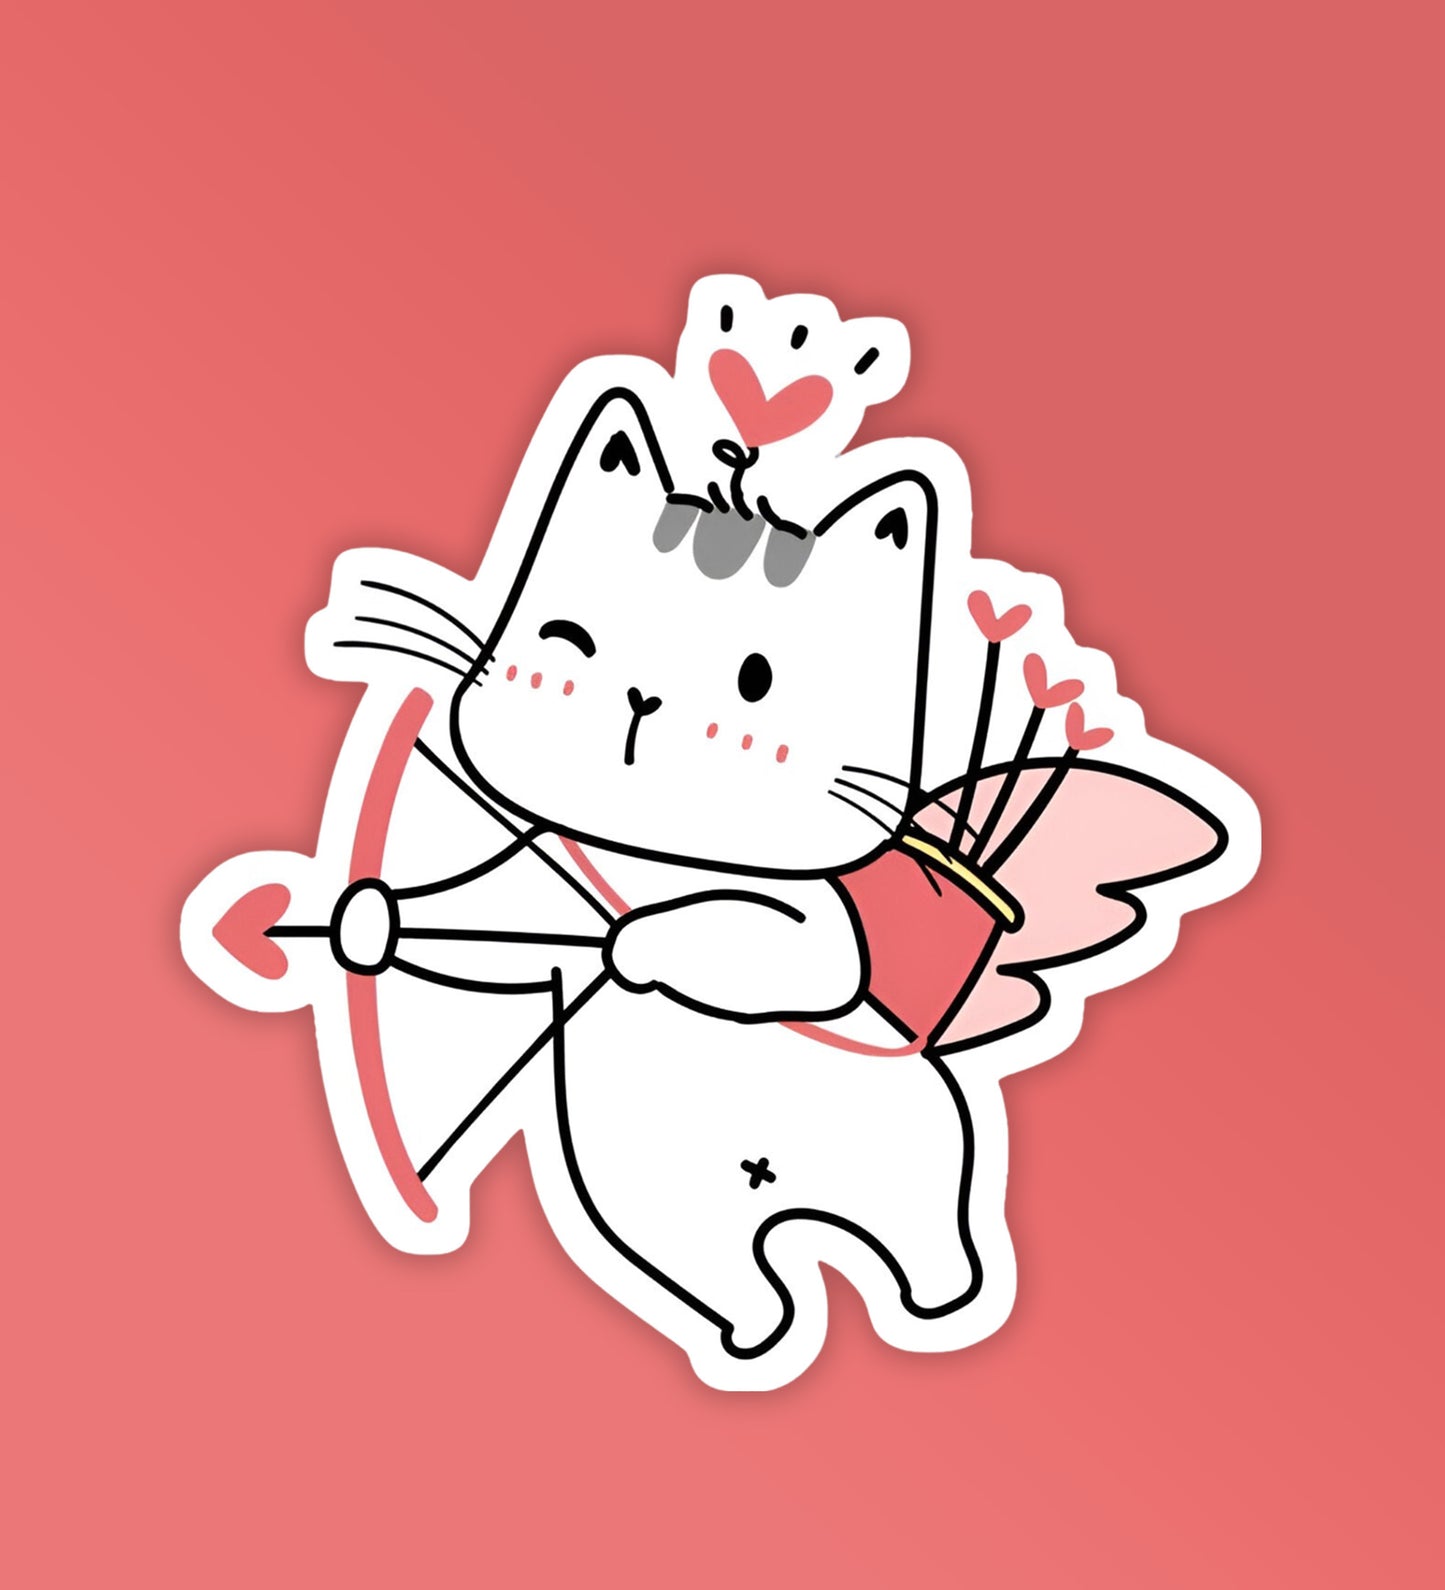 Cupid Kitty | Laptop & Mobile Stickers